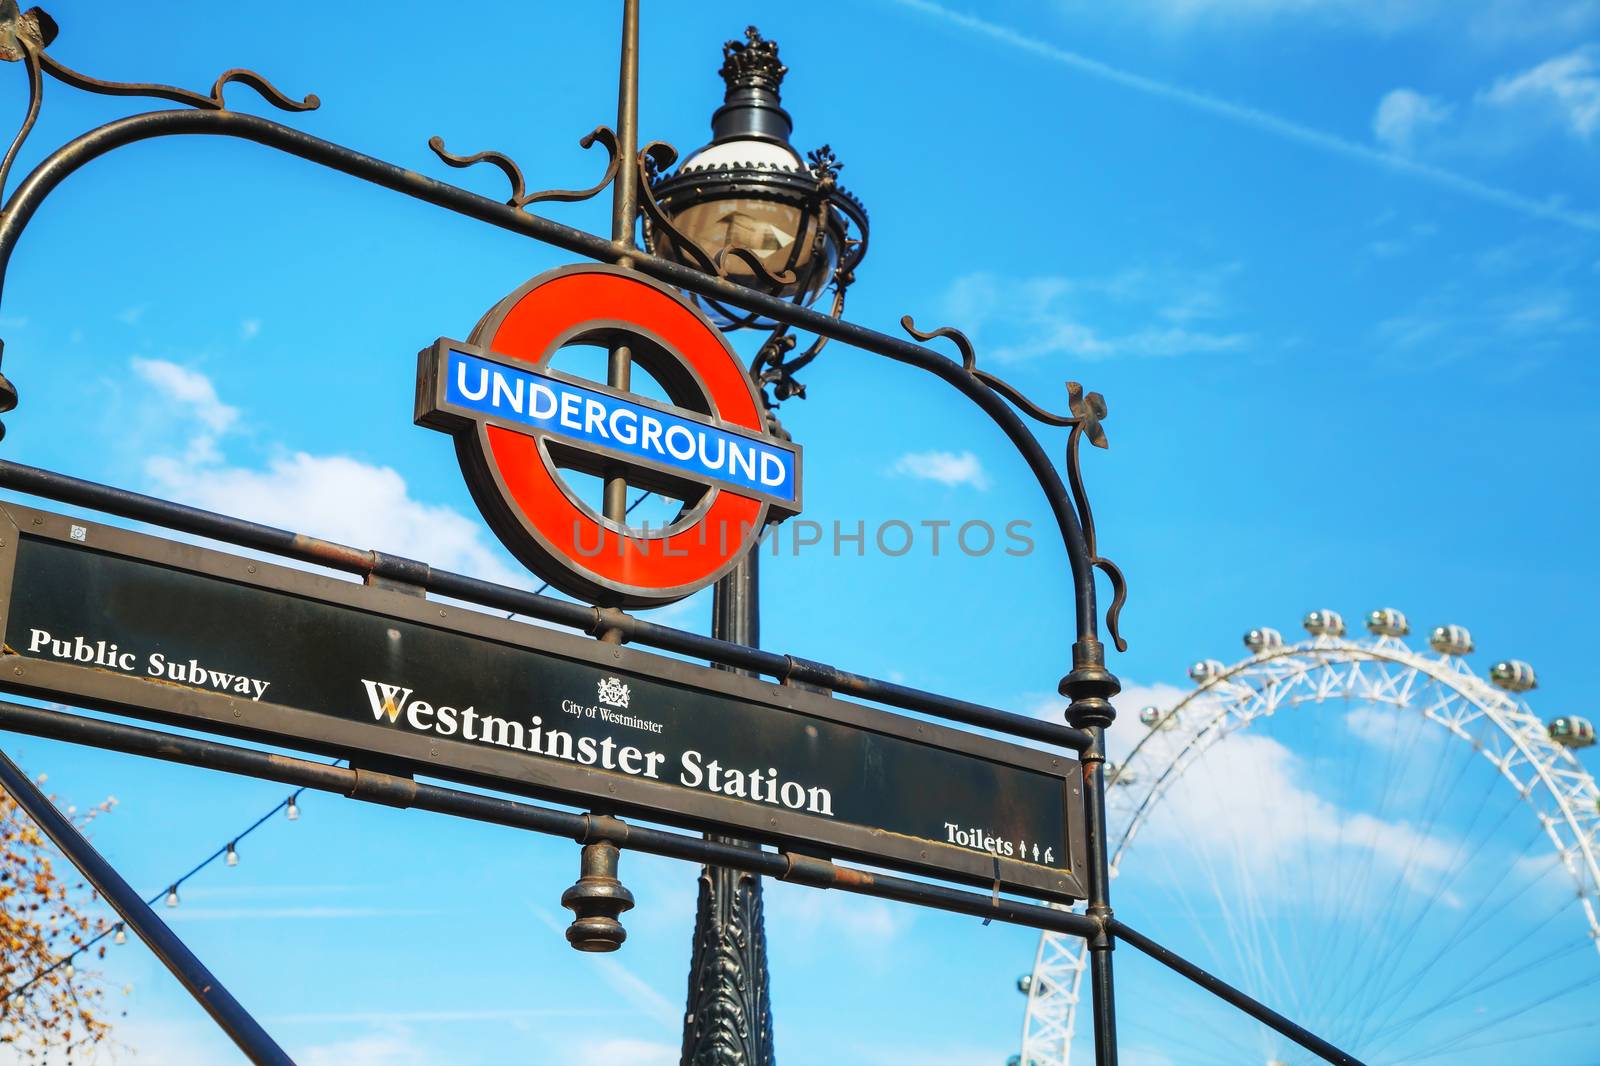 LONDON - APRIL 12: London underground sign at the Westminster station on April 12, 2015 in London, UK. The system serves 270 stations and has 402 kilometres of track, 52% of which is above ground.